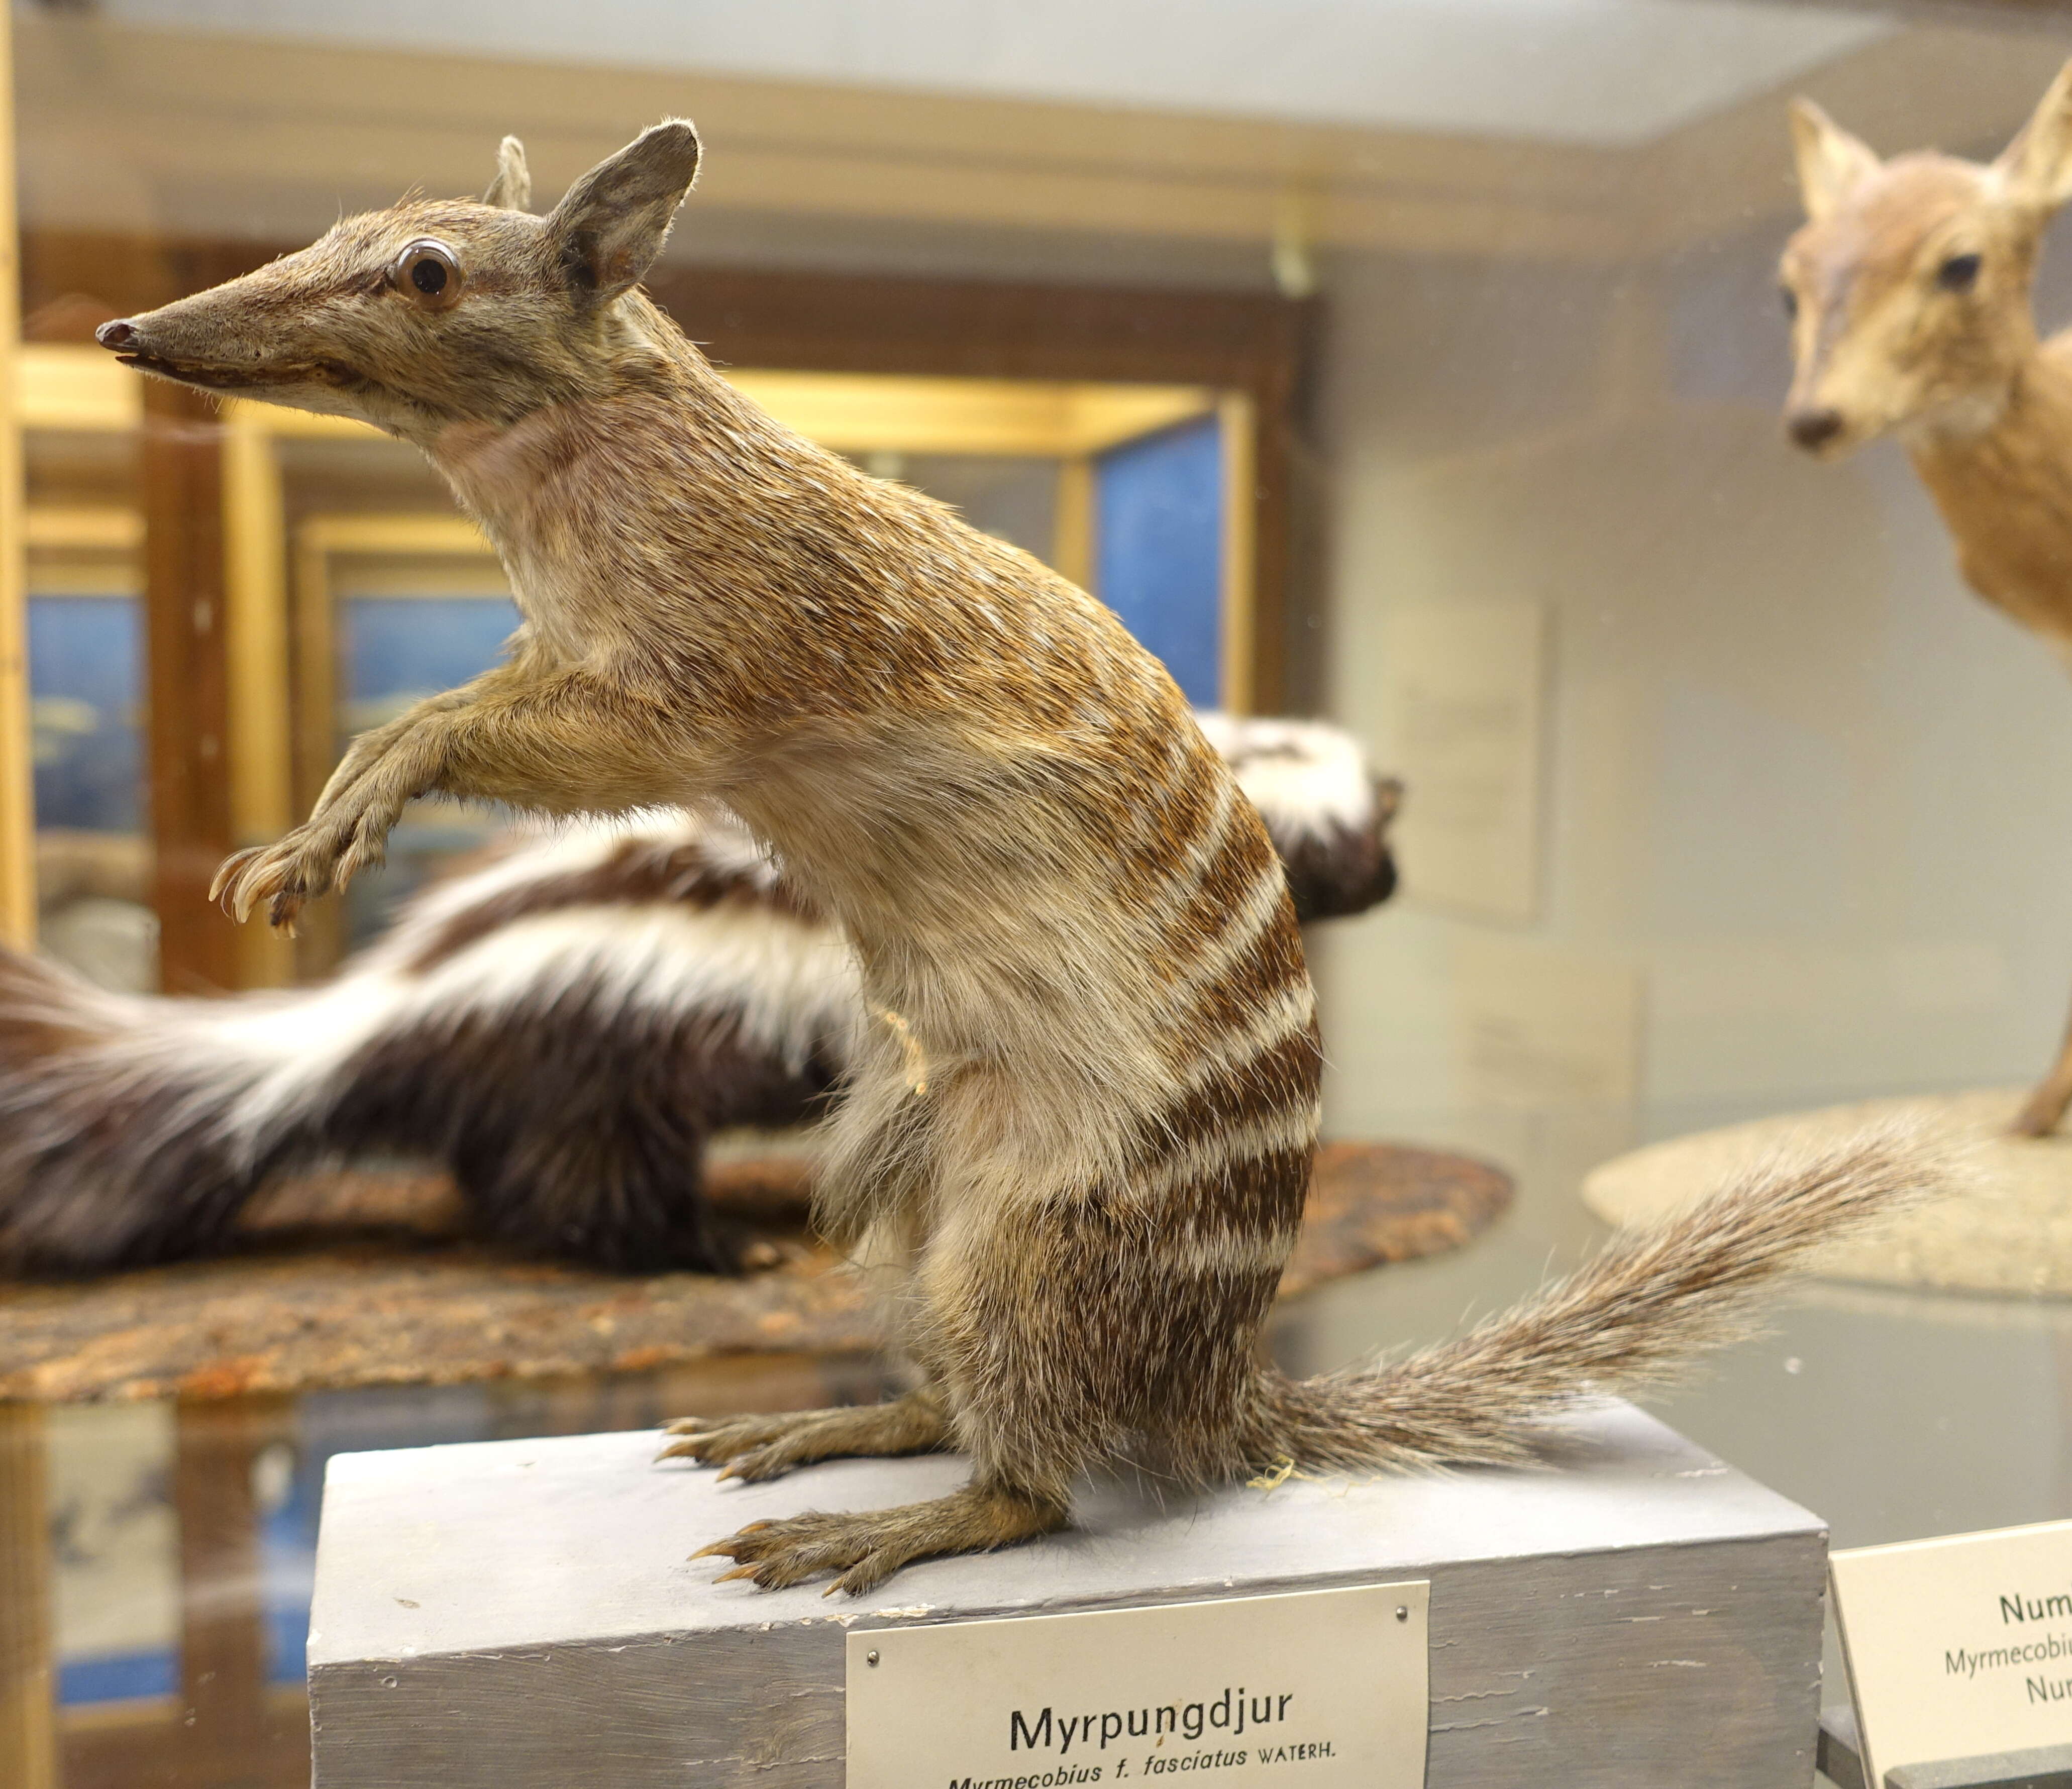 Image of numbats